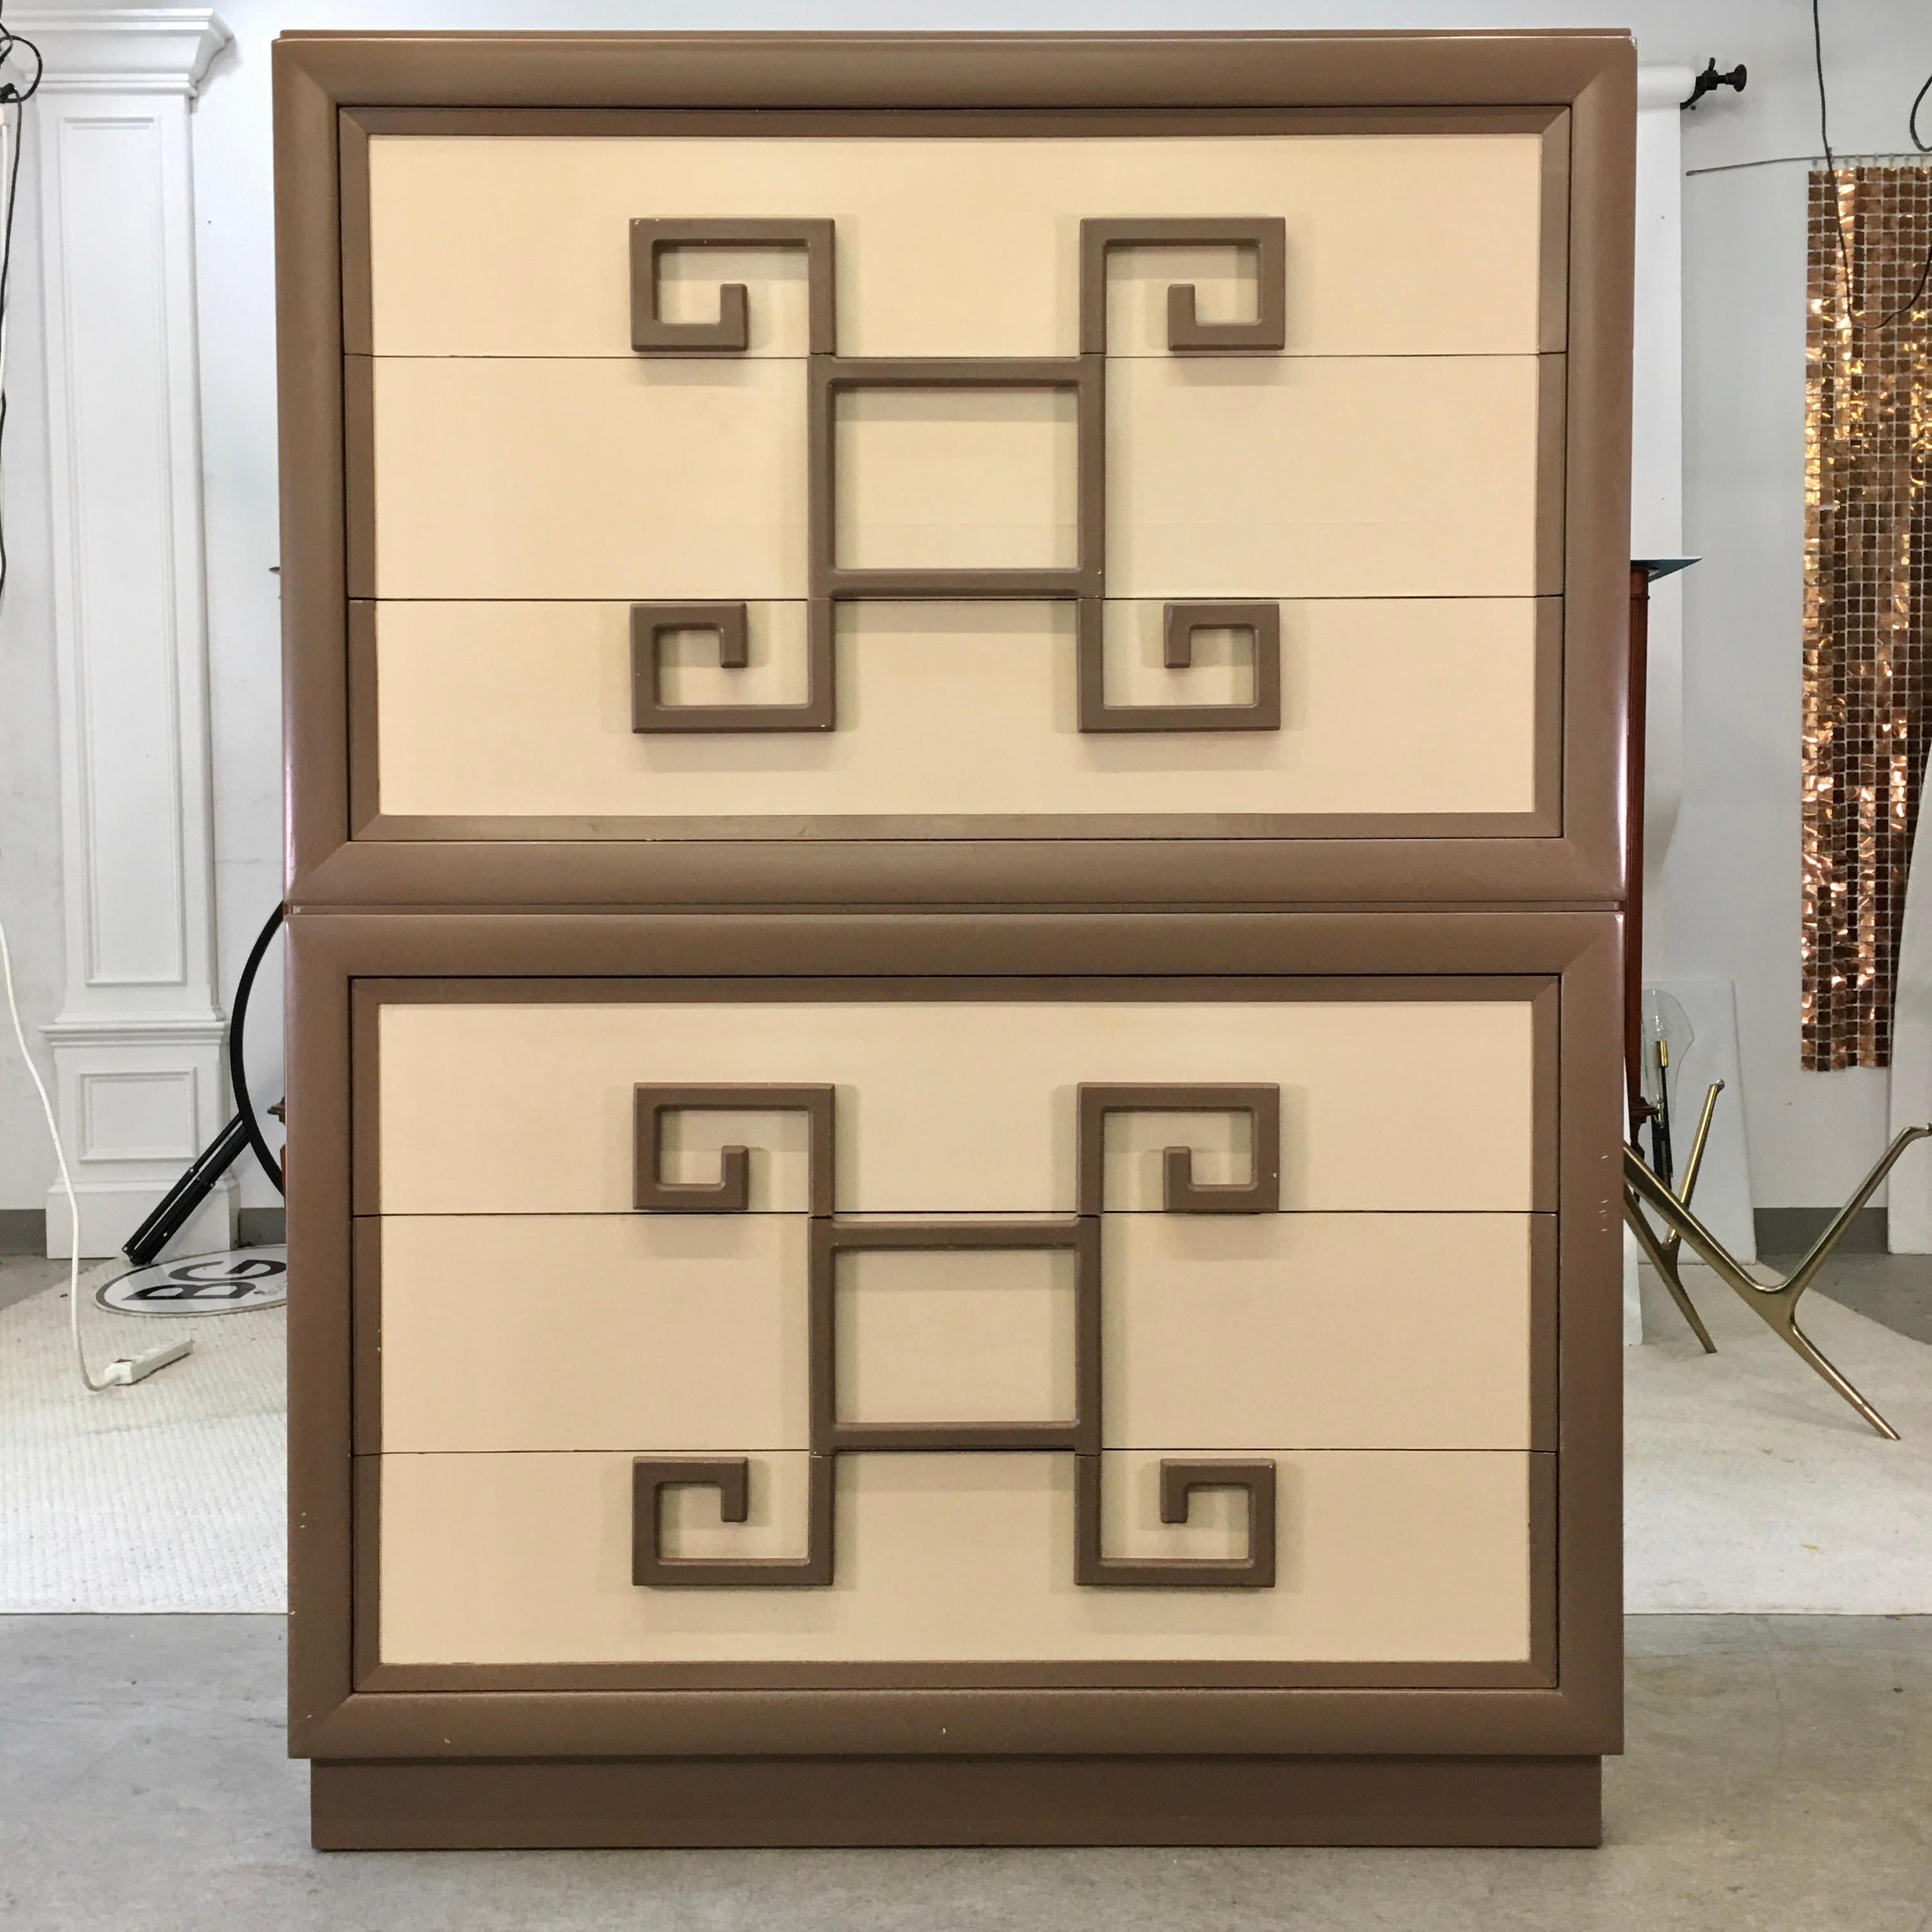 Chest on chest by Kittinger of Buffalo from their famed 1948 Mandarin collection. Original two-tone mushroom and cream lacquer finish. See image 12 for the hex color scans. 
Each chest has three large and deep drawers, two of which are fitted with